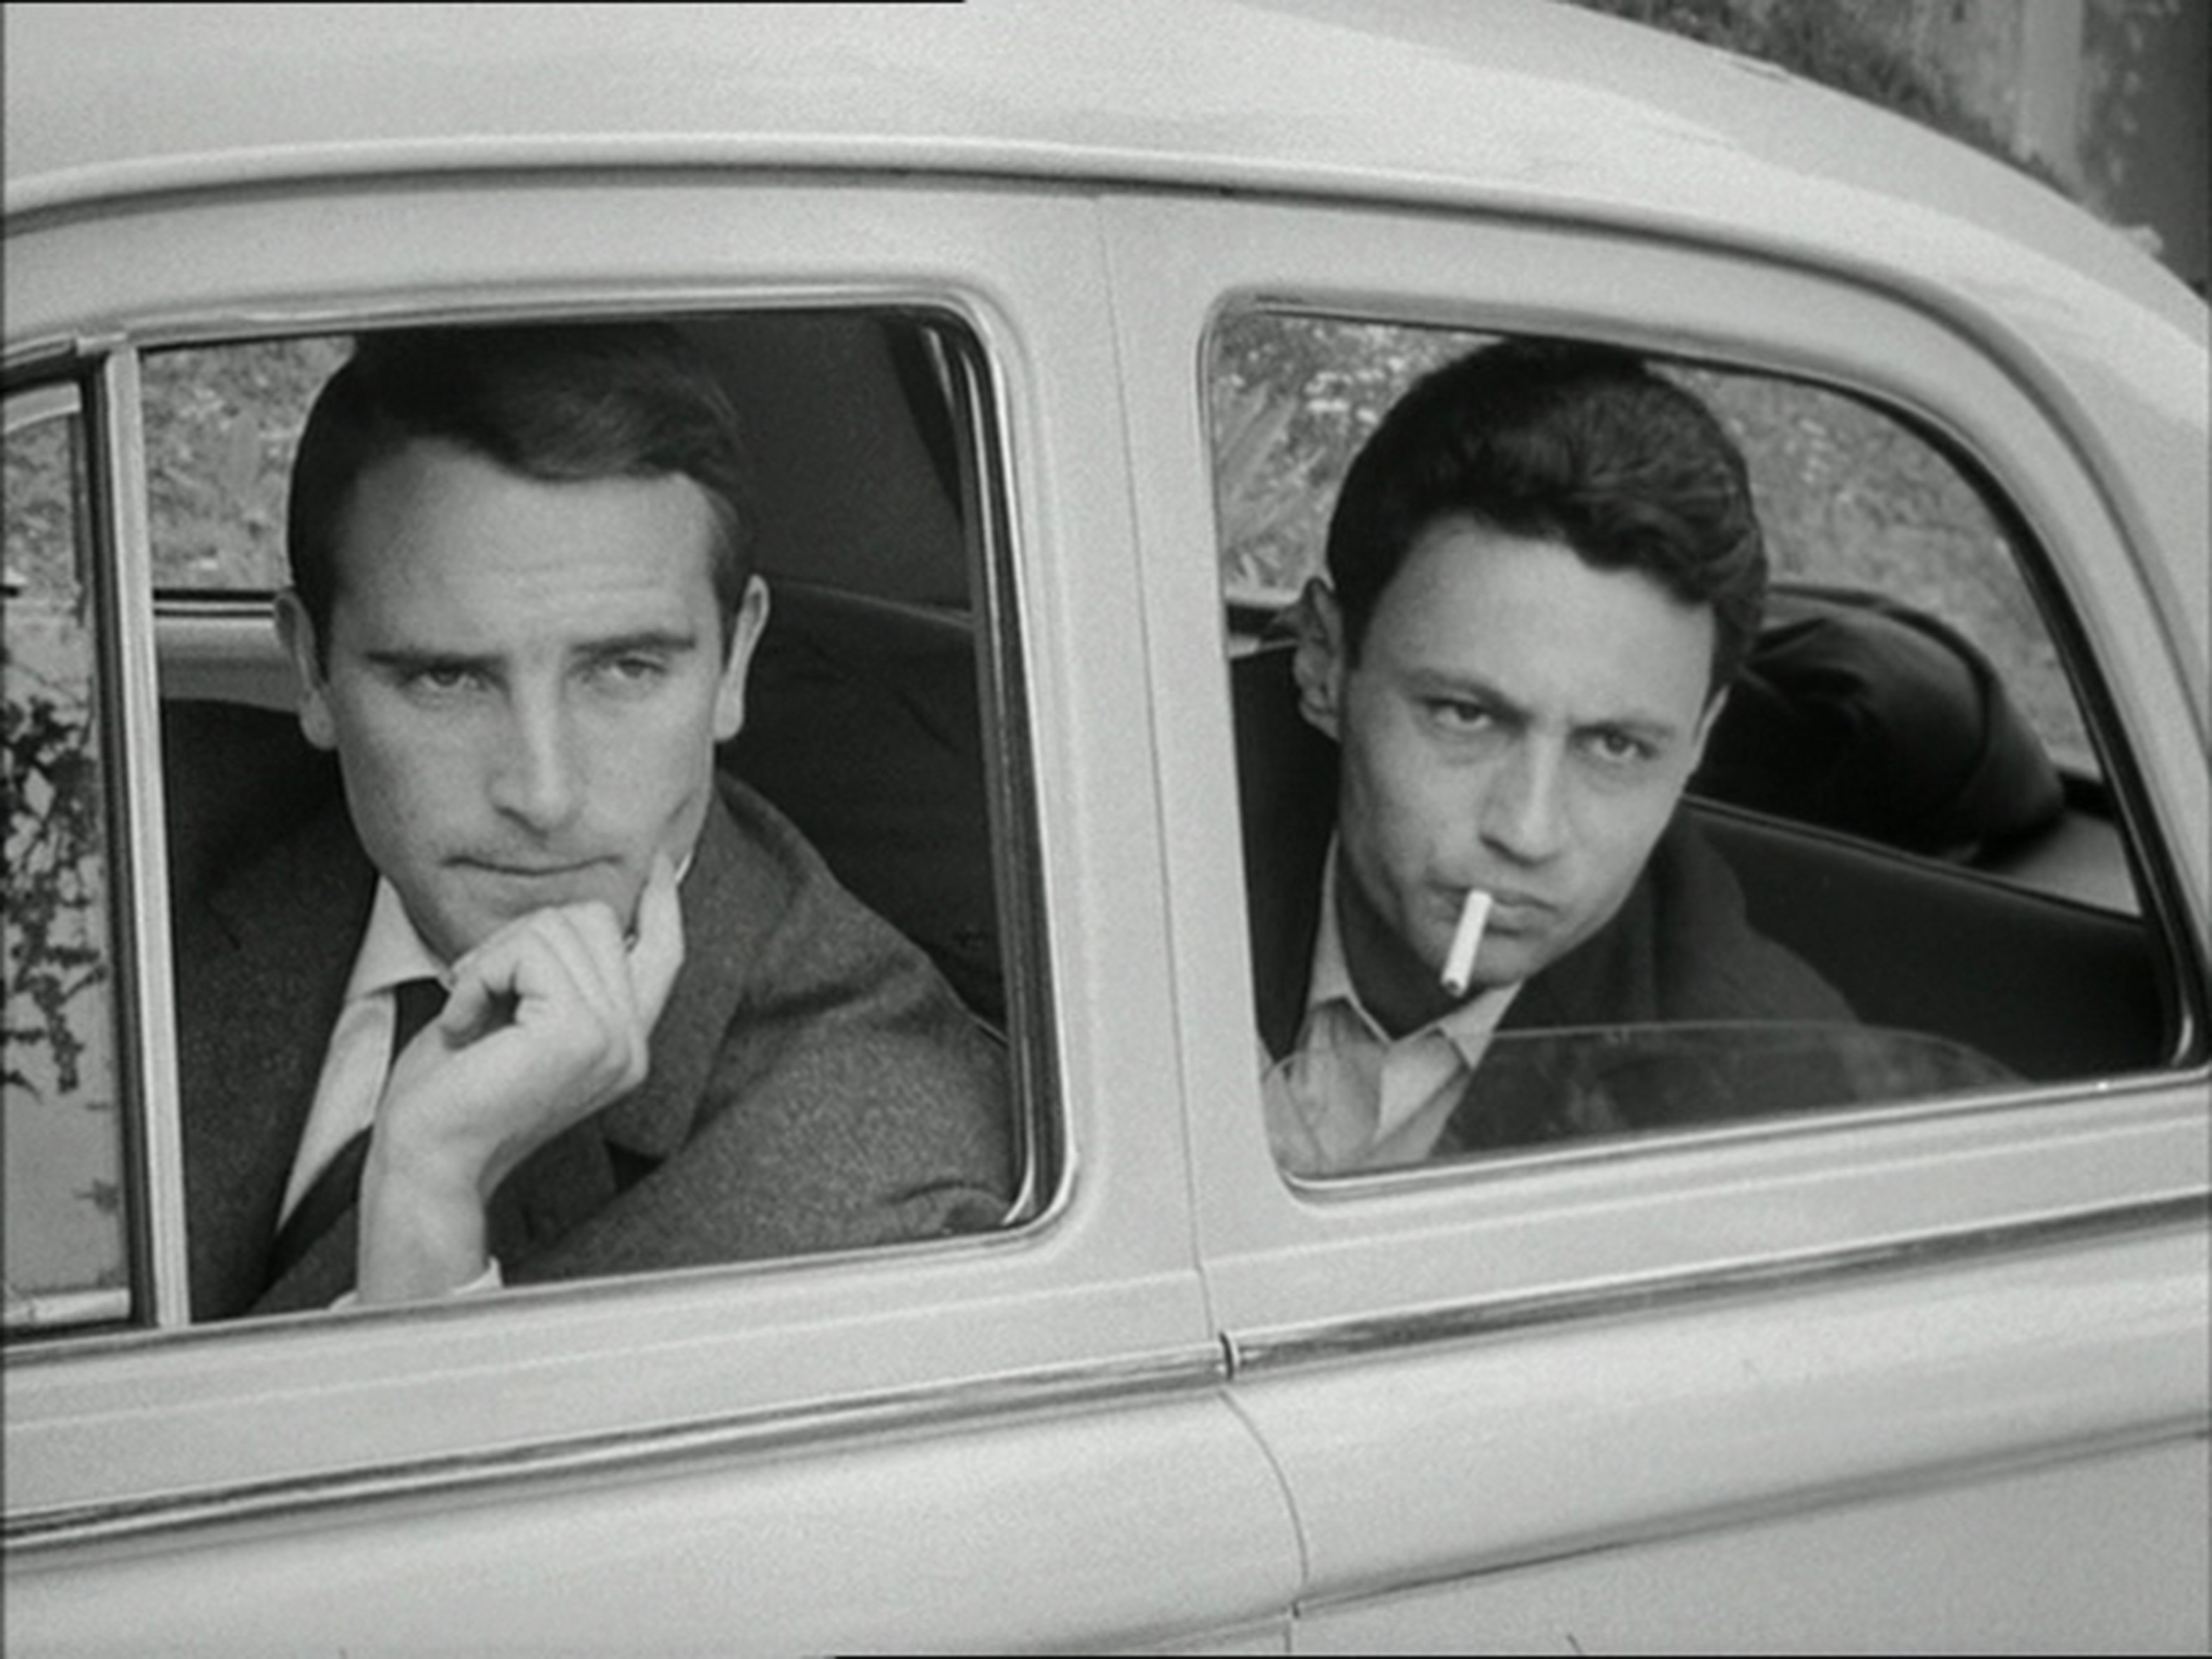 Still of Paul Beauvais and Michel Subor in Le petit soldat (1963)